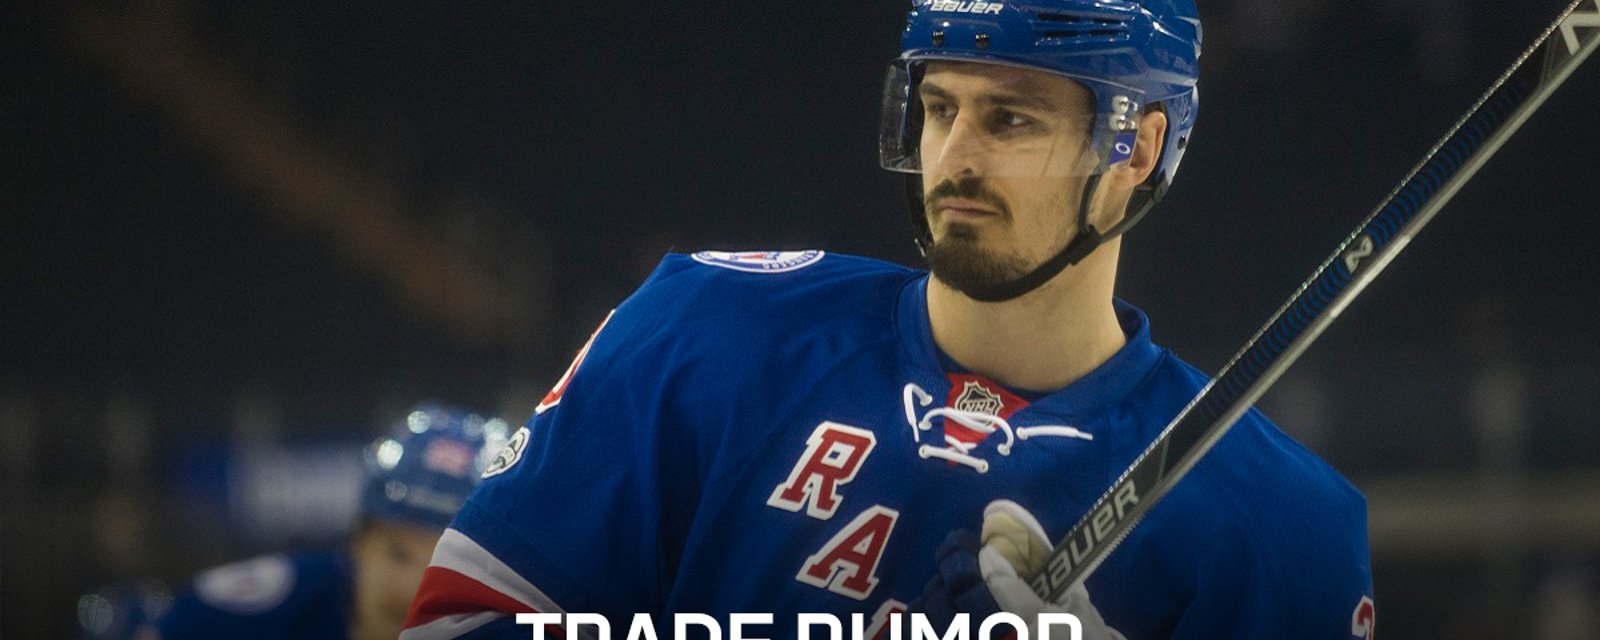 At least 4 NHL teams interested in acquiring Chris Kreider from the Rangers.